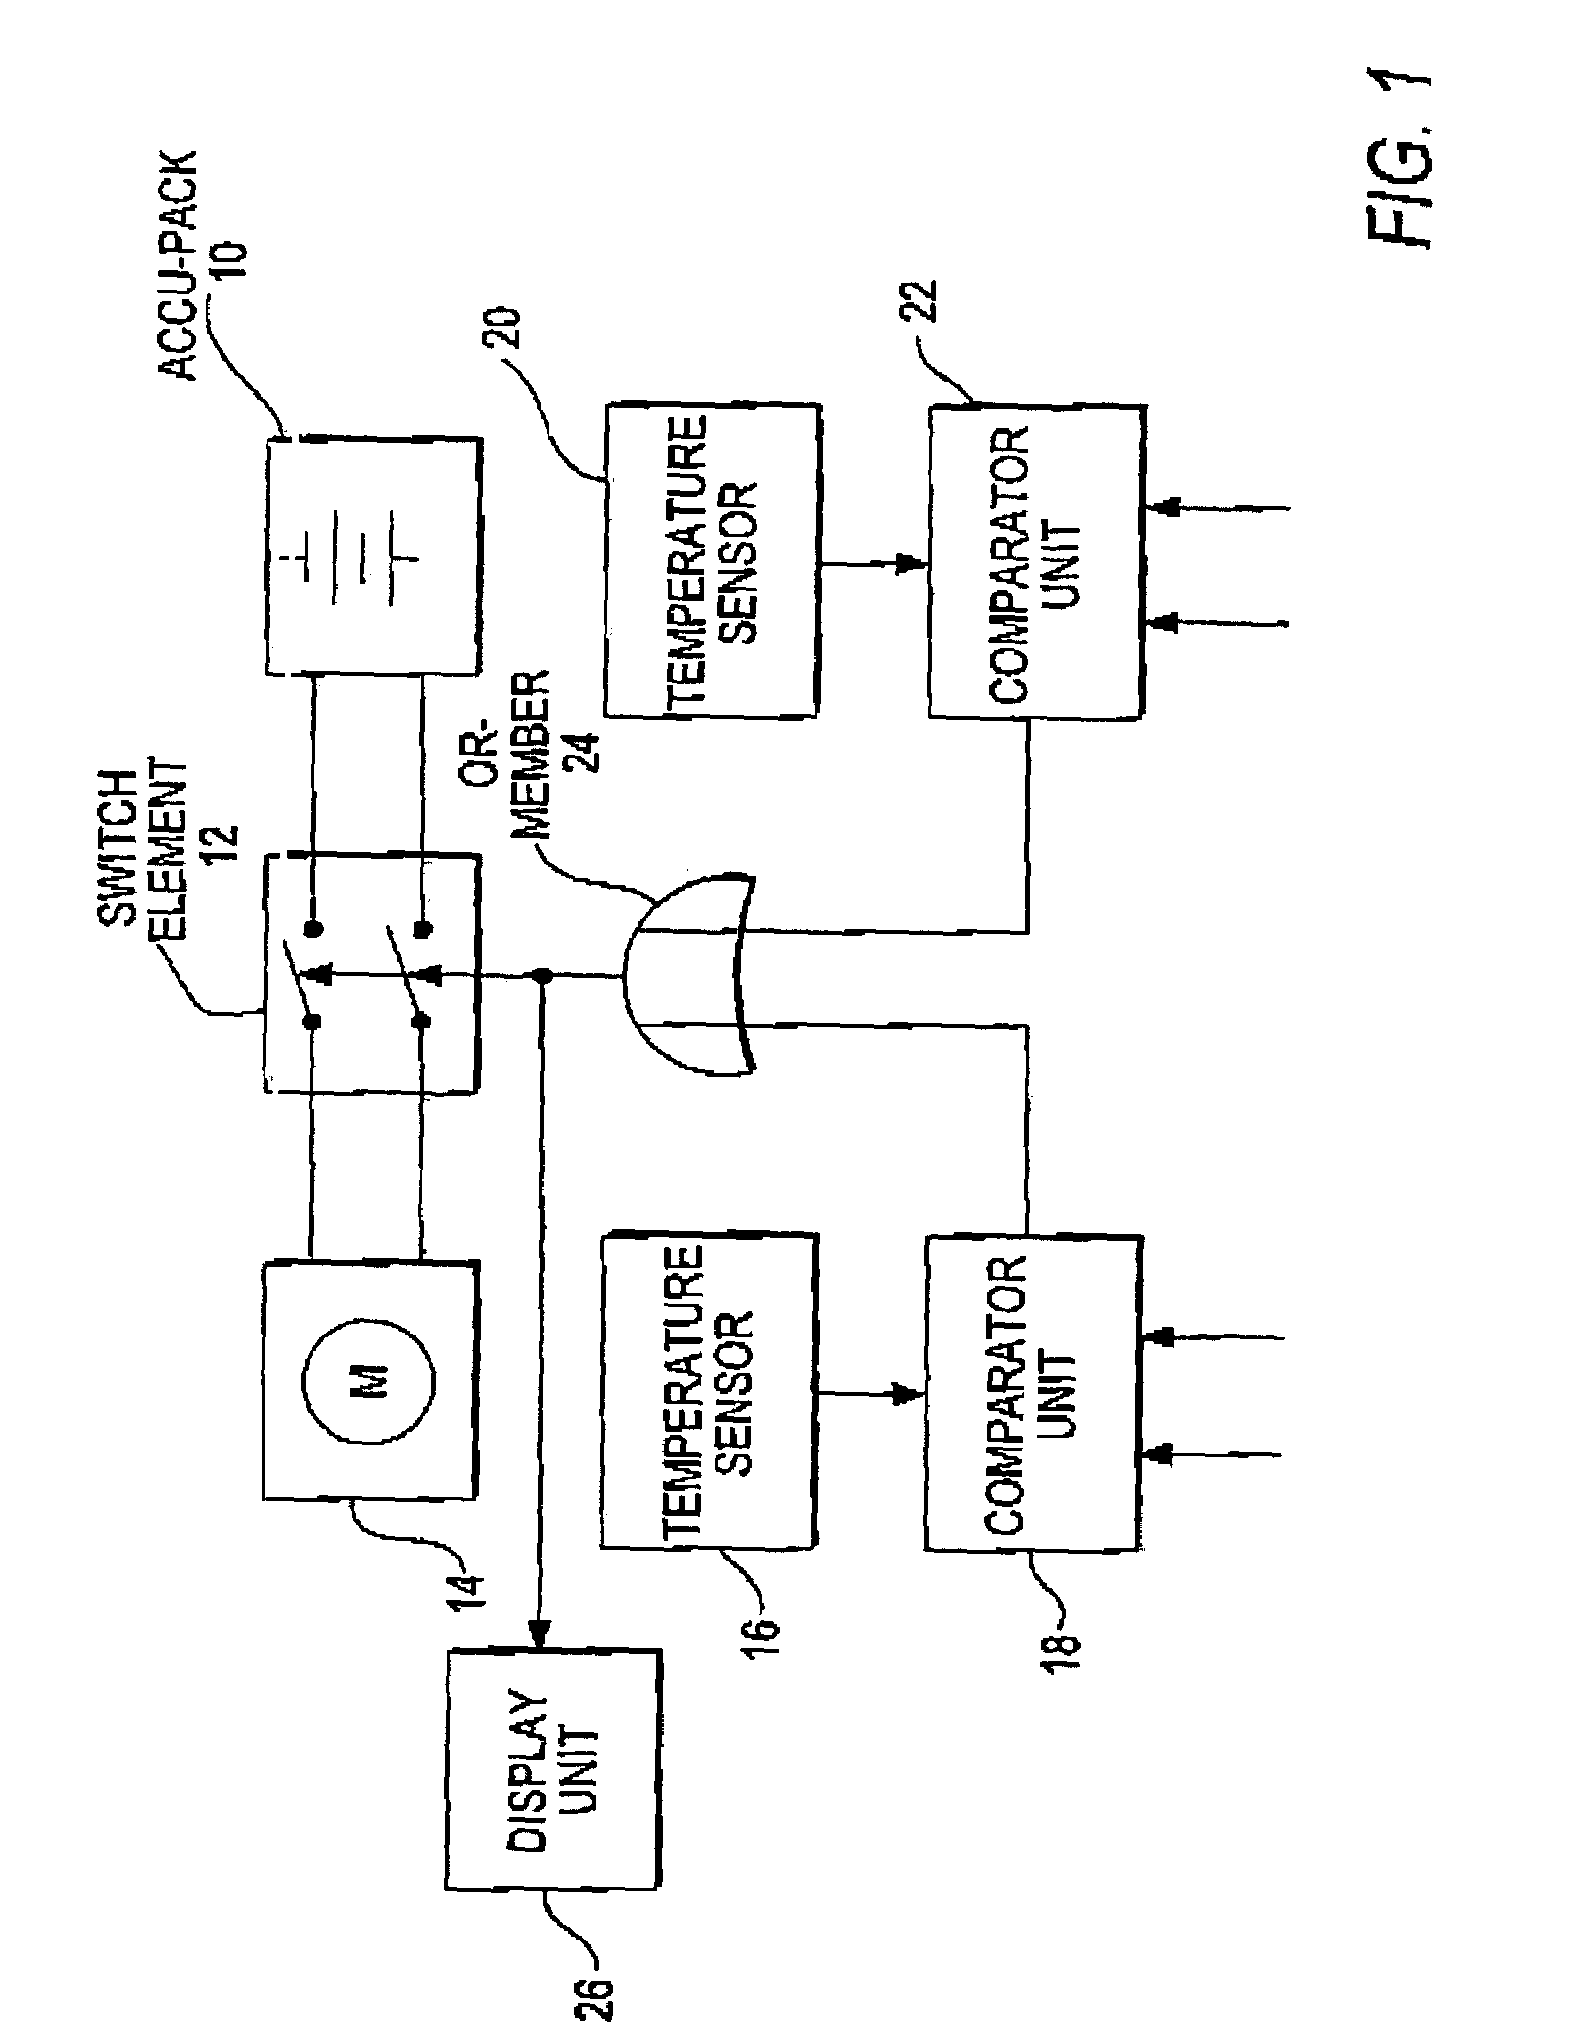 Monitoring device, electrical machine tool, current supply device, and associated method of operation